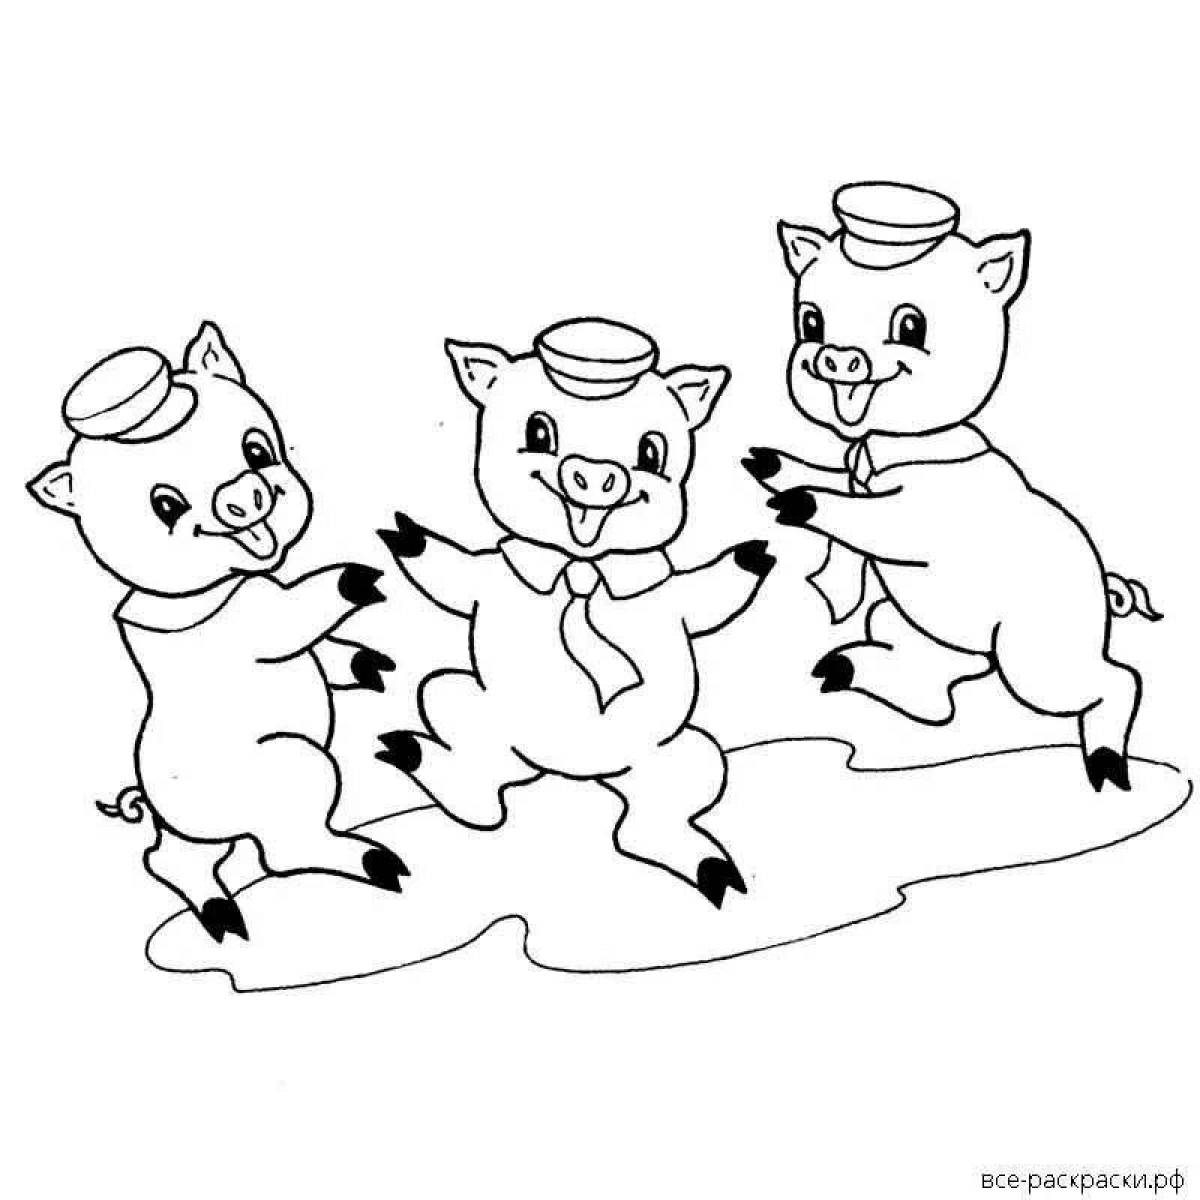 Amazing Three Little Pigs coloring pages for kids